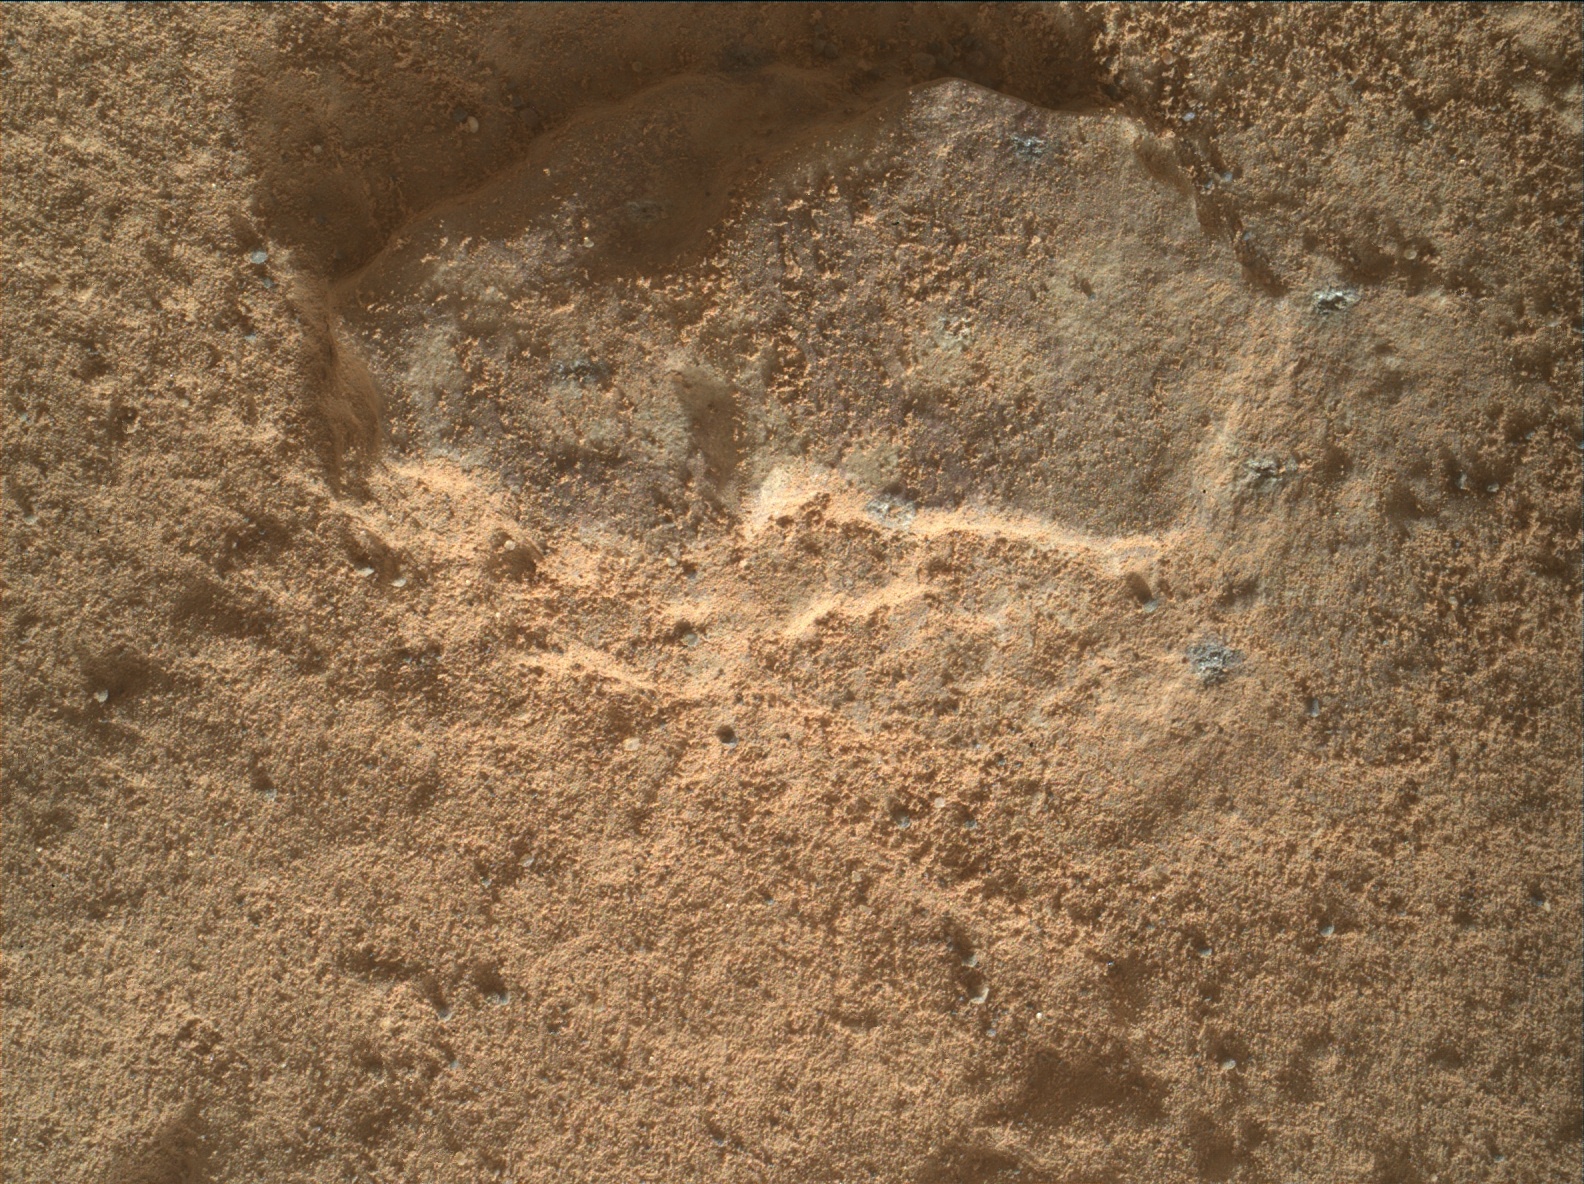 Nasa's Mars rover Curiosity acquired this image using its Mars Hand Lens Imager (MAHLI) on Sol 2575